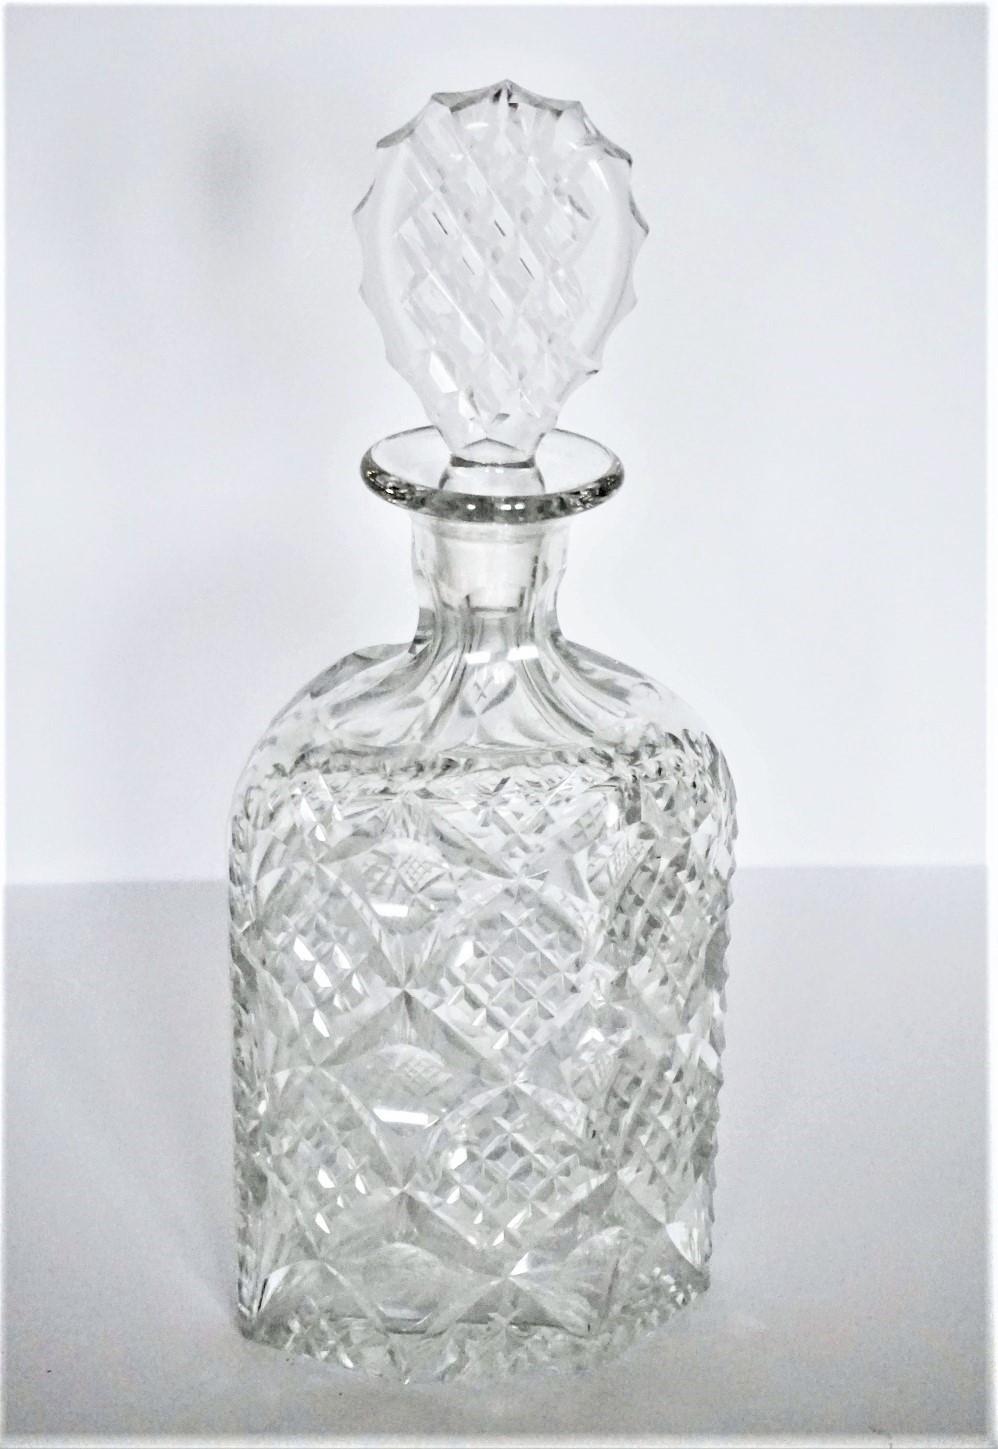 A striking Victorian crystaldecanter with elegant deep hand cut decor design in a rare hexagonal shape, with its original matching stopper, England, 1885-1890. This decanter is of thick crystal glass, suitable for whiskey, cognac or any other solid